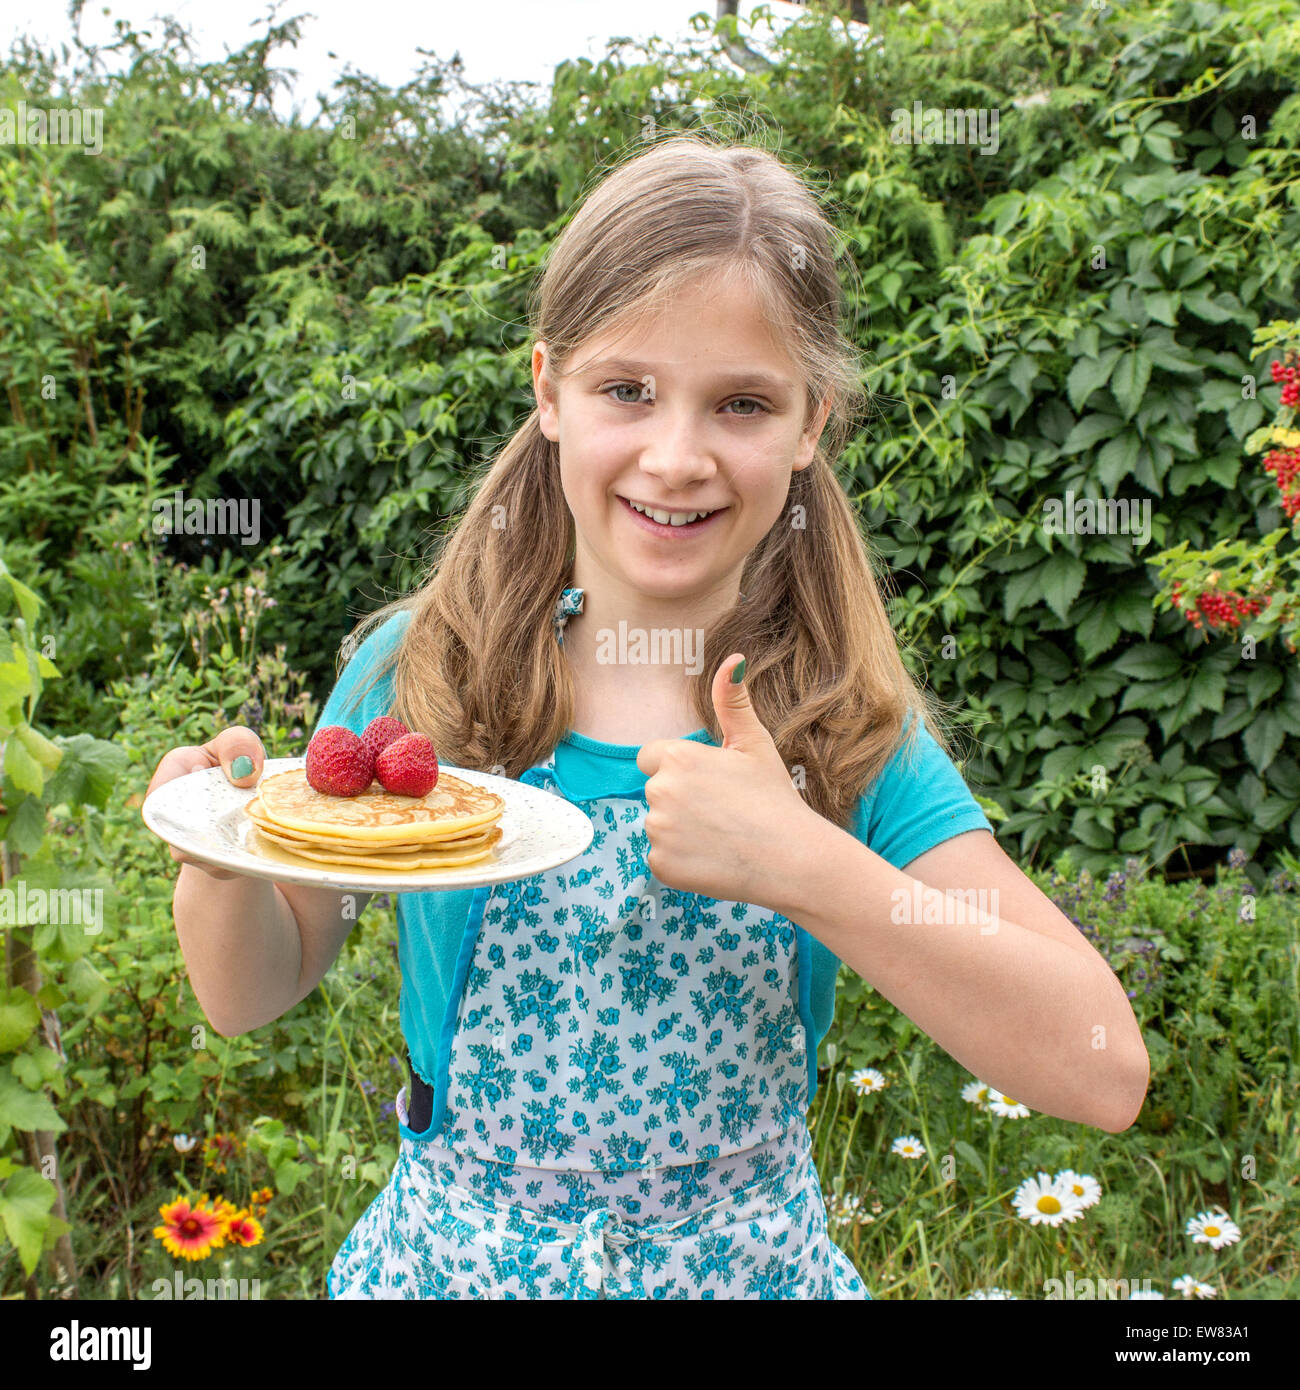 A girl holding a plate of pancakes and strawberries Stock Photo